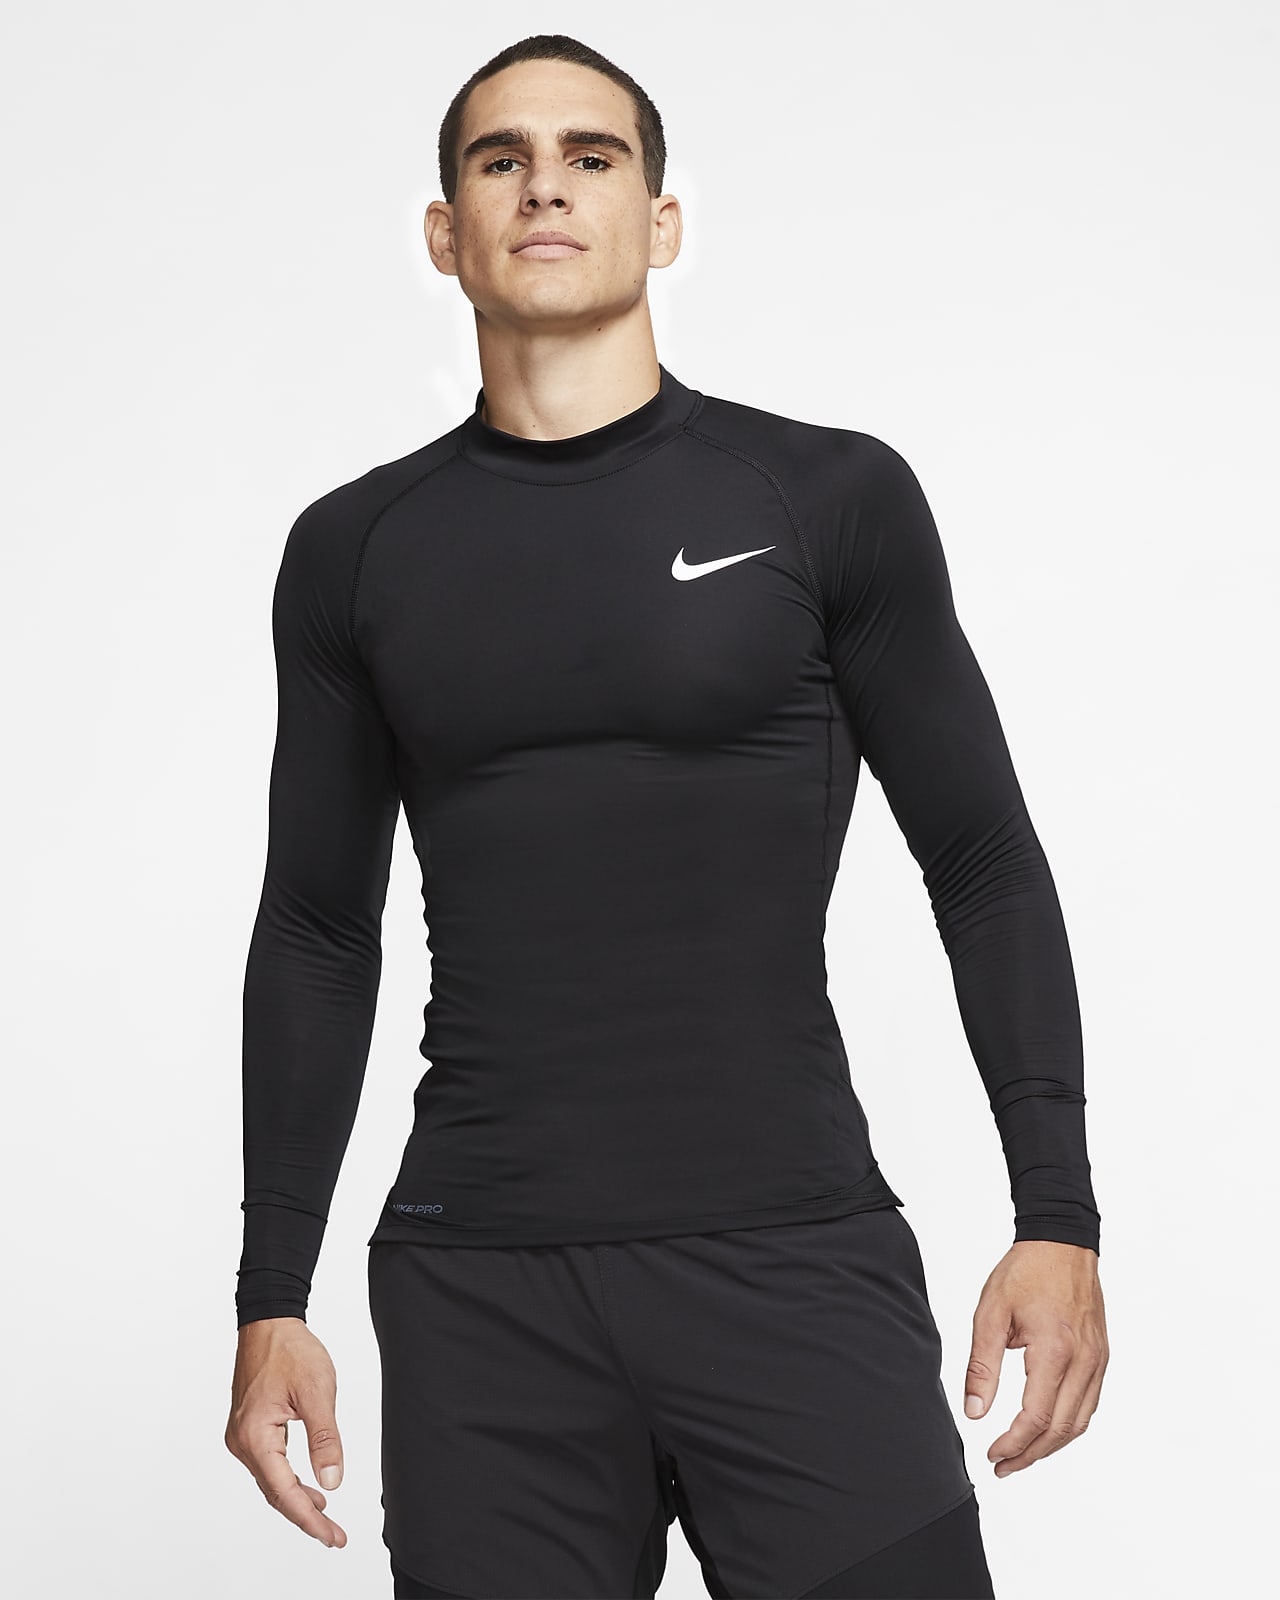 for me Pilfer Passed Nike Pro Men's Long Sleeve United Kingdom, SAVE 45% - aveclumiere.com